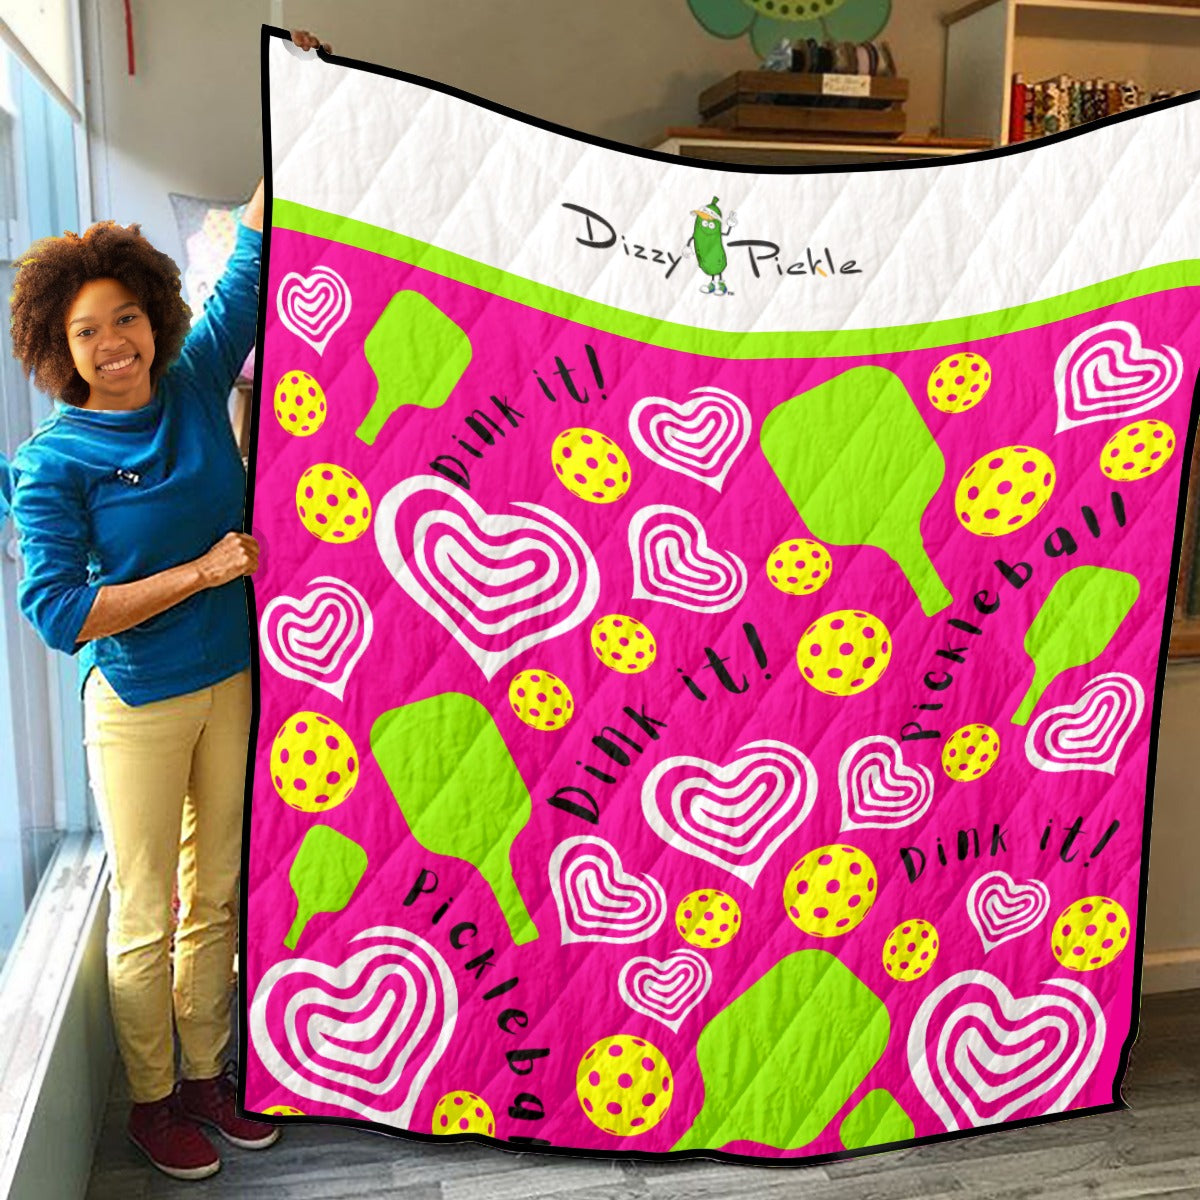 Dinking Diva Hearts - Pink - Large - Lightweight Quilt by Dizzy Pickle